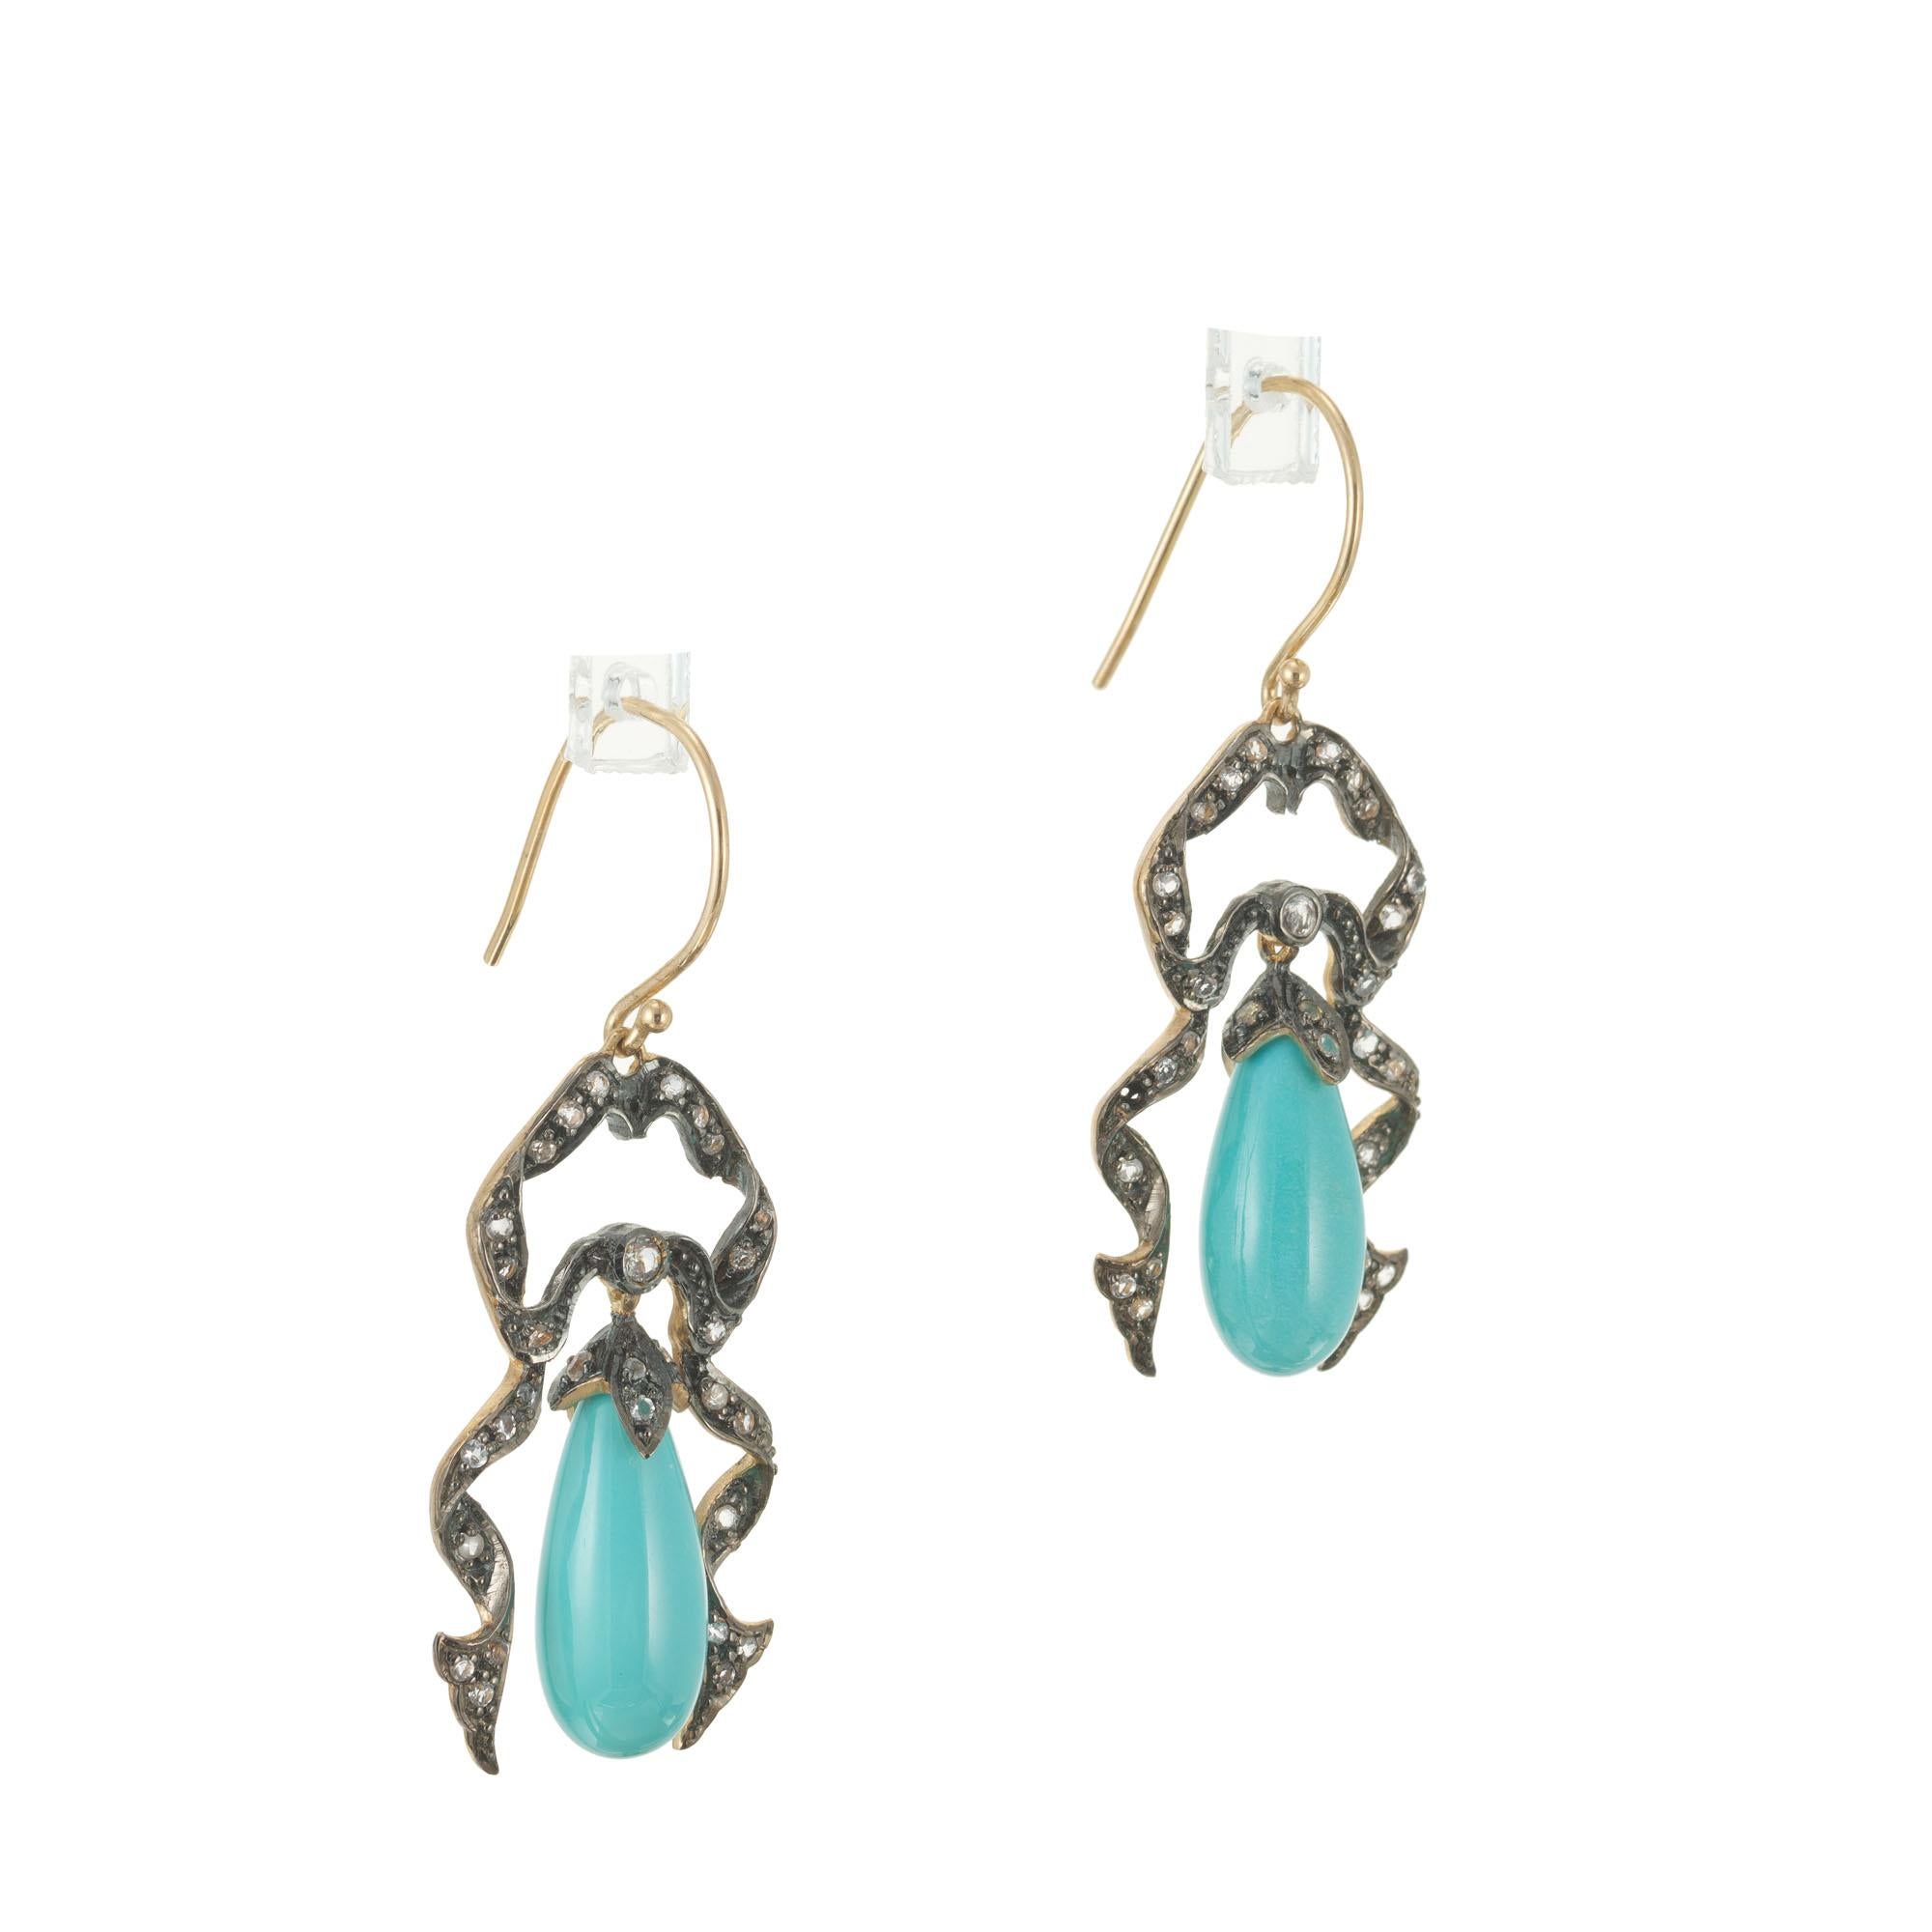 Victorian Revival Turquoise and diamond dangle earrings. 9k yellow gold ribbon style frames with 60 round diamonds and two pear shaped turquoise dangles. 

15 x 7mm pear Turquoise
60 round diamonds, approx. total weight .40cts, H to I, SI1 - I
5.9